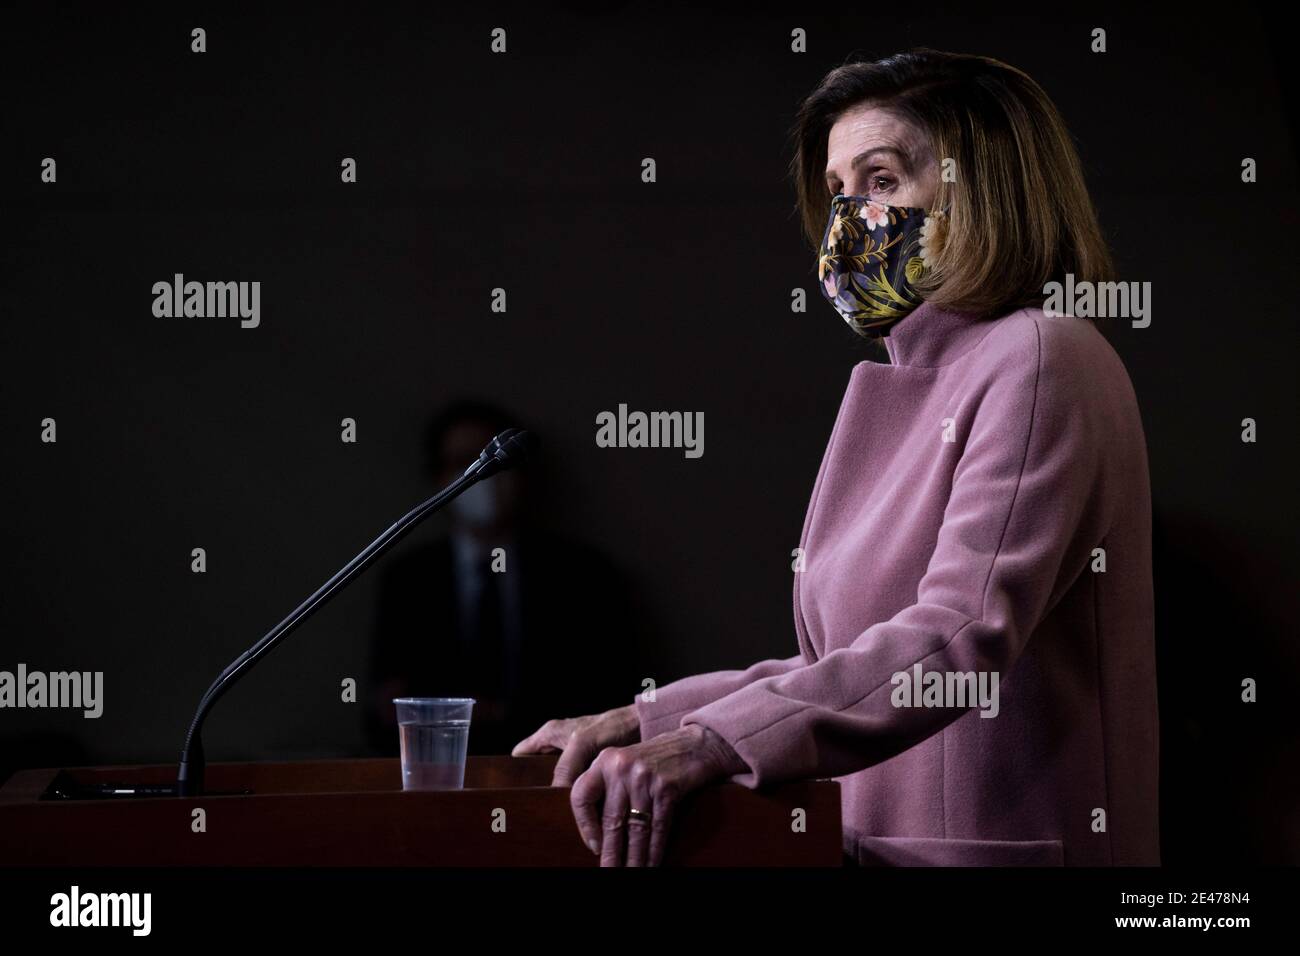 Washington, USA. 21st Jan, 2021. U.S. House Speaker Nancy Pelosi speaks during a press conference on Capitol Hill in Washington, DC, the United States, Jan. 21, 2021. U.S. House Speaker Nancy Pelosi said on Thursday that House committees will work on a new COVID-19 relief package next week. Credit: Ting Shen/Xinhua/Alamy Live News Stock Photo